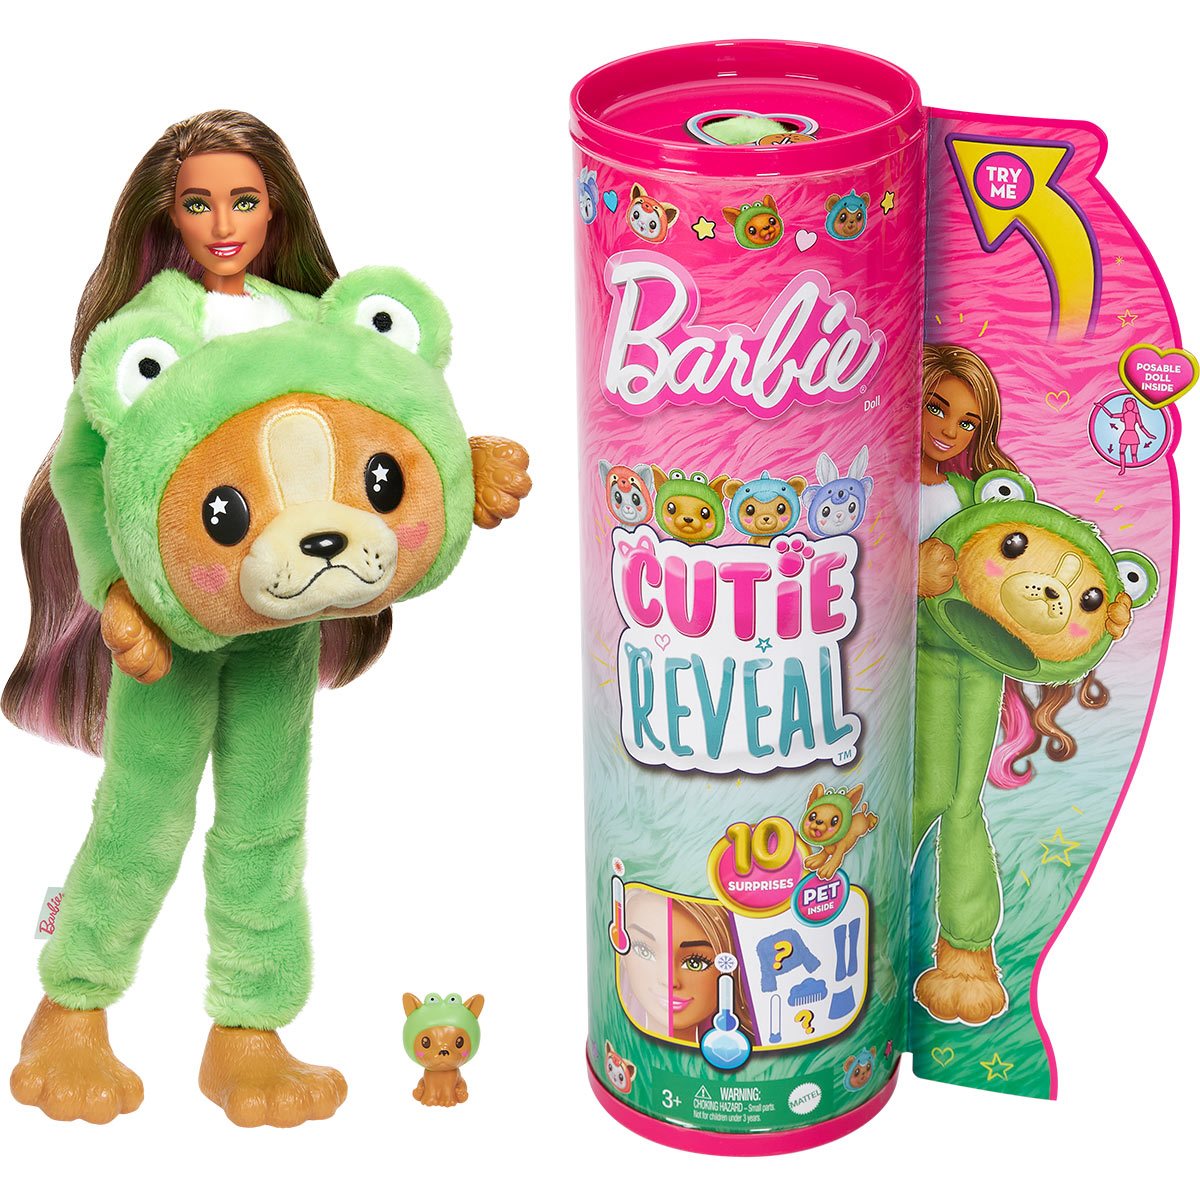 Barbie Cutie Reveal Puppy as Frog Doll - Entertainment Earth